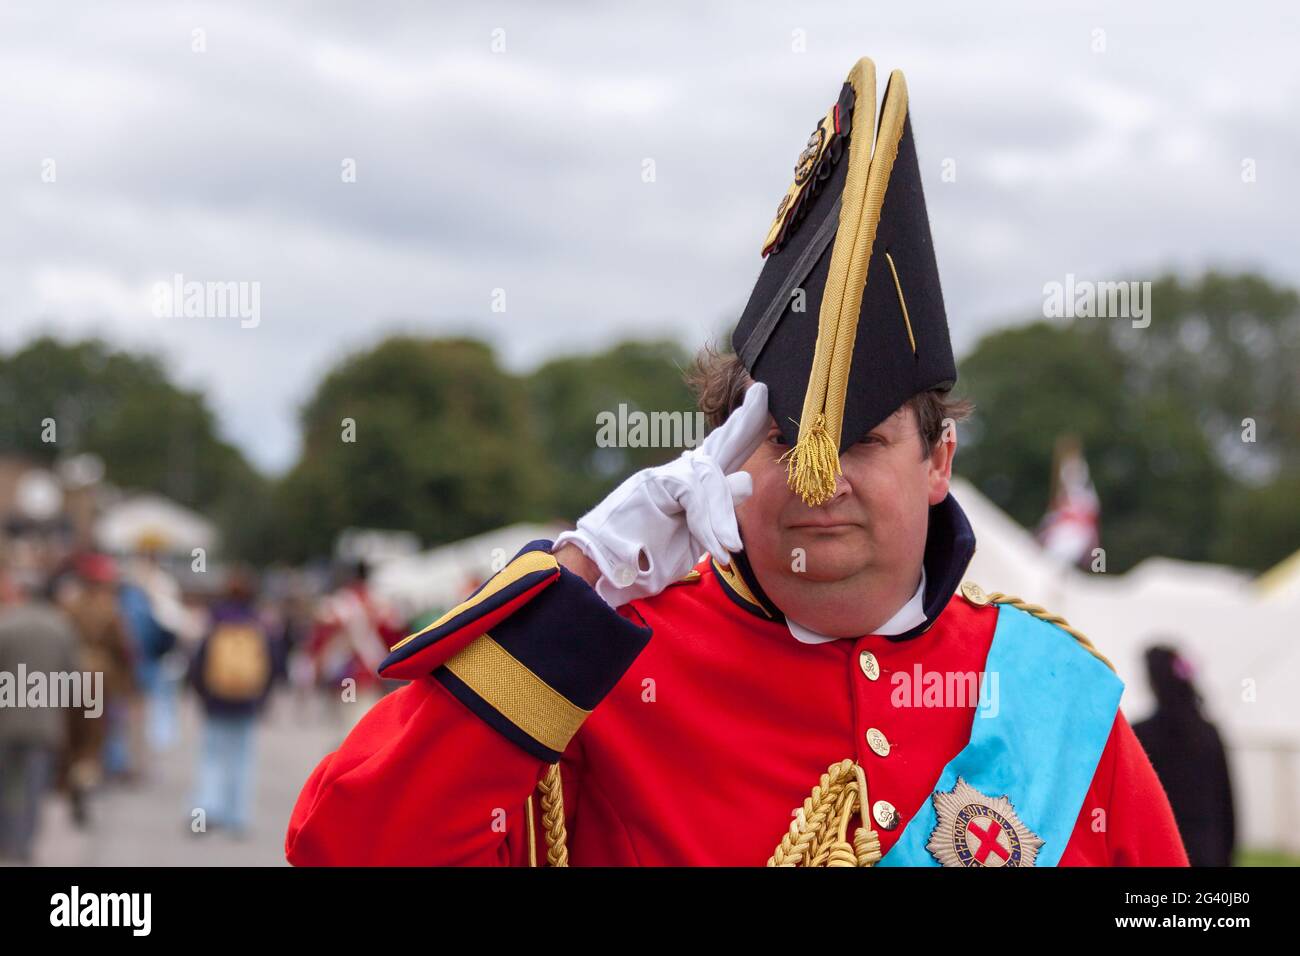 DETLING, KENT/UK - AUGUST 29 : Man in costume at the Military Odyssey in Detling Kent on August 29, 2010. Unidentified man. Stock Photo